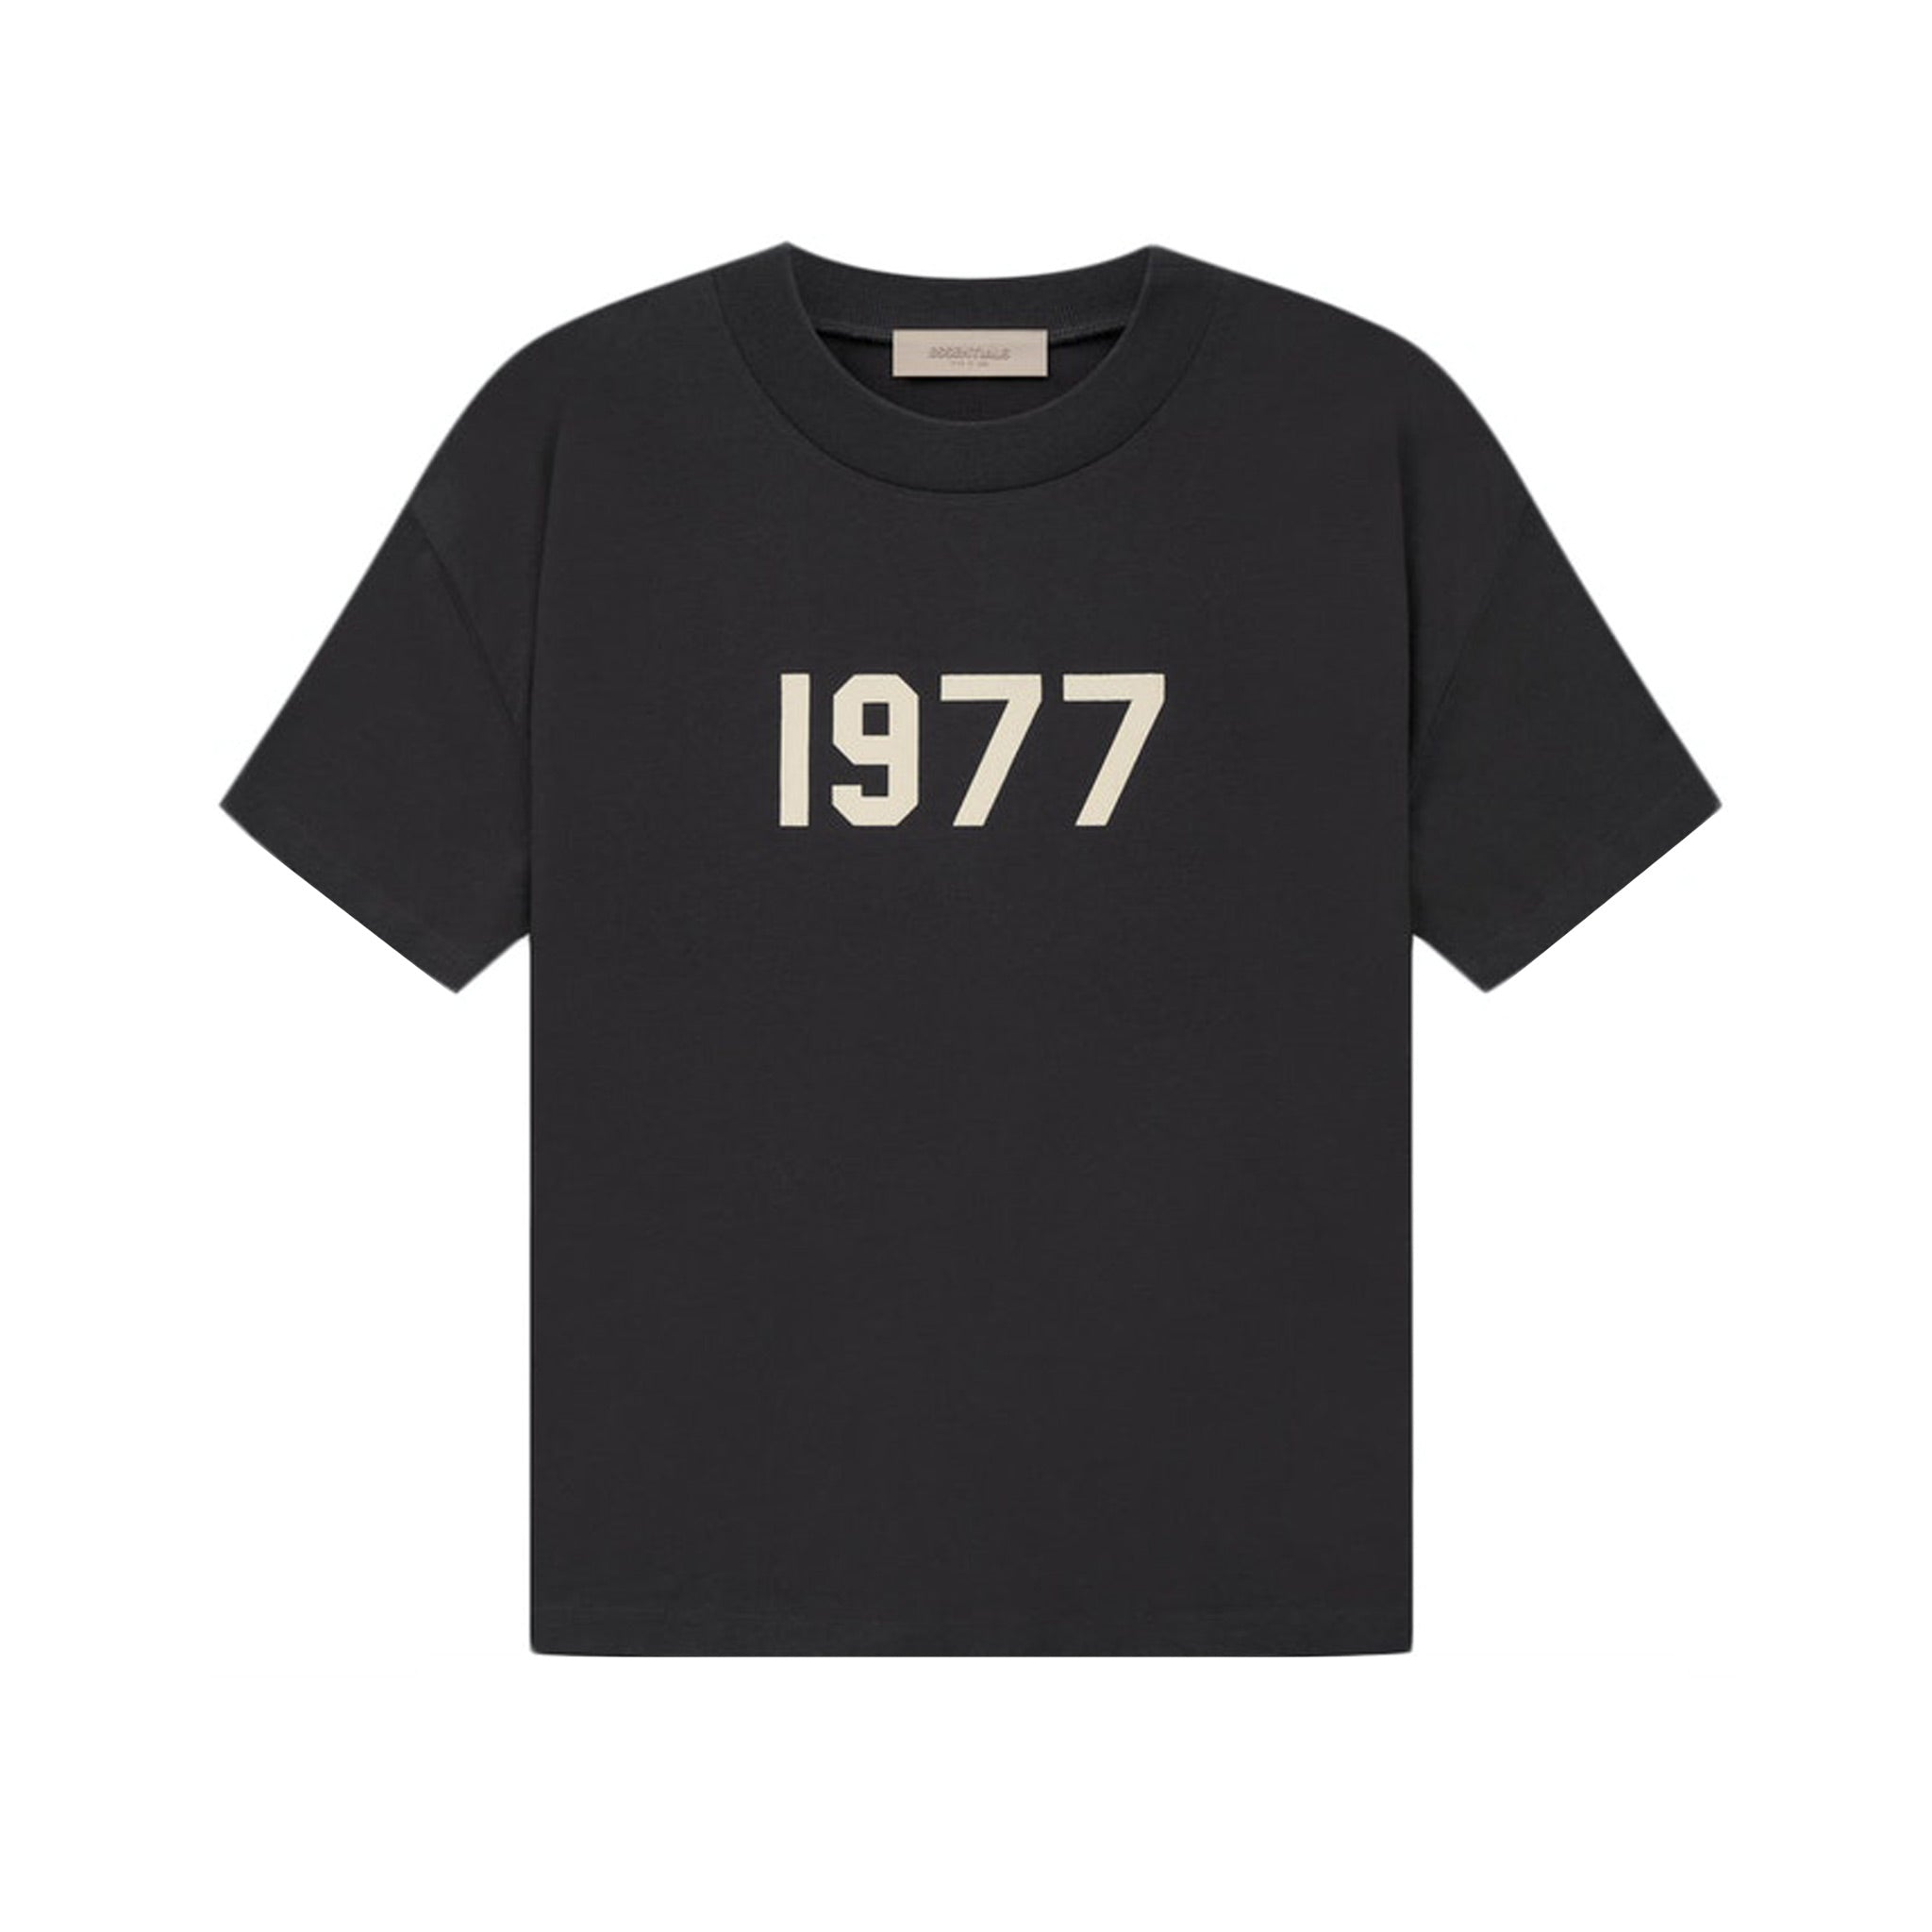 Fear Of God Essentials 1977 Tee SS22 - Iron | Points Streetwear Store ...